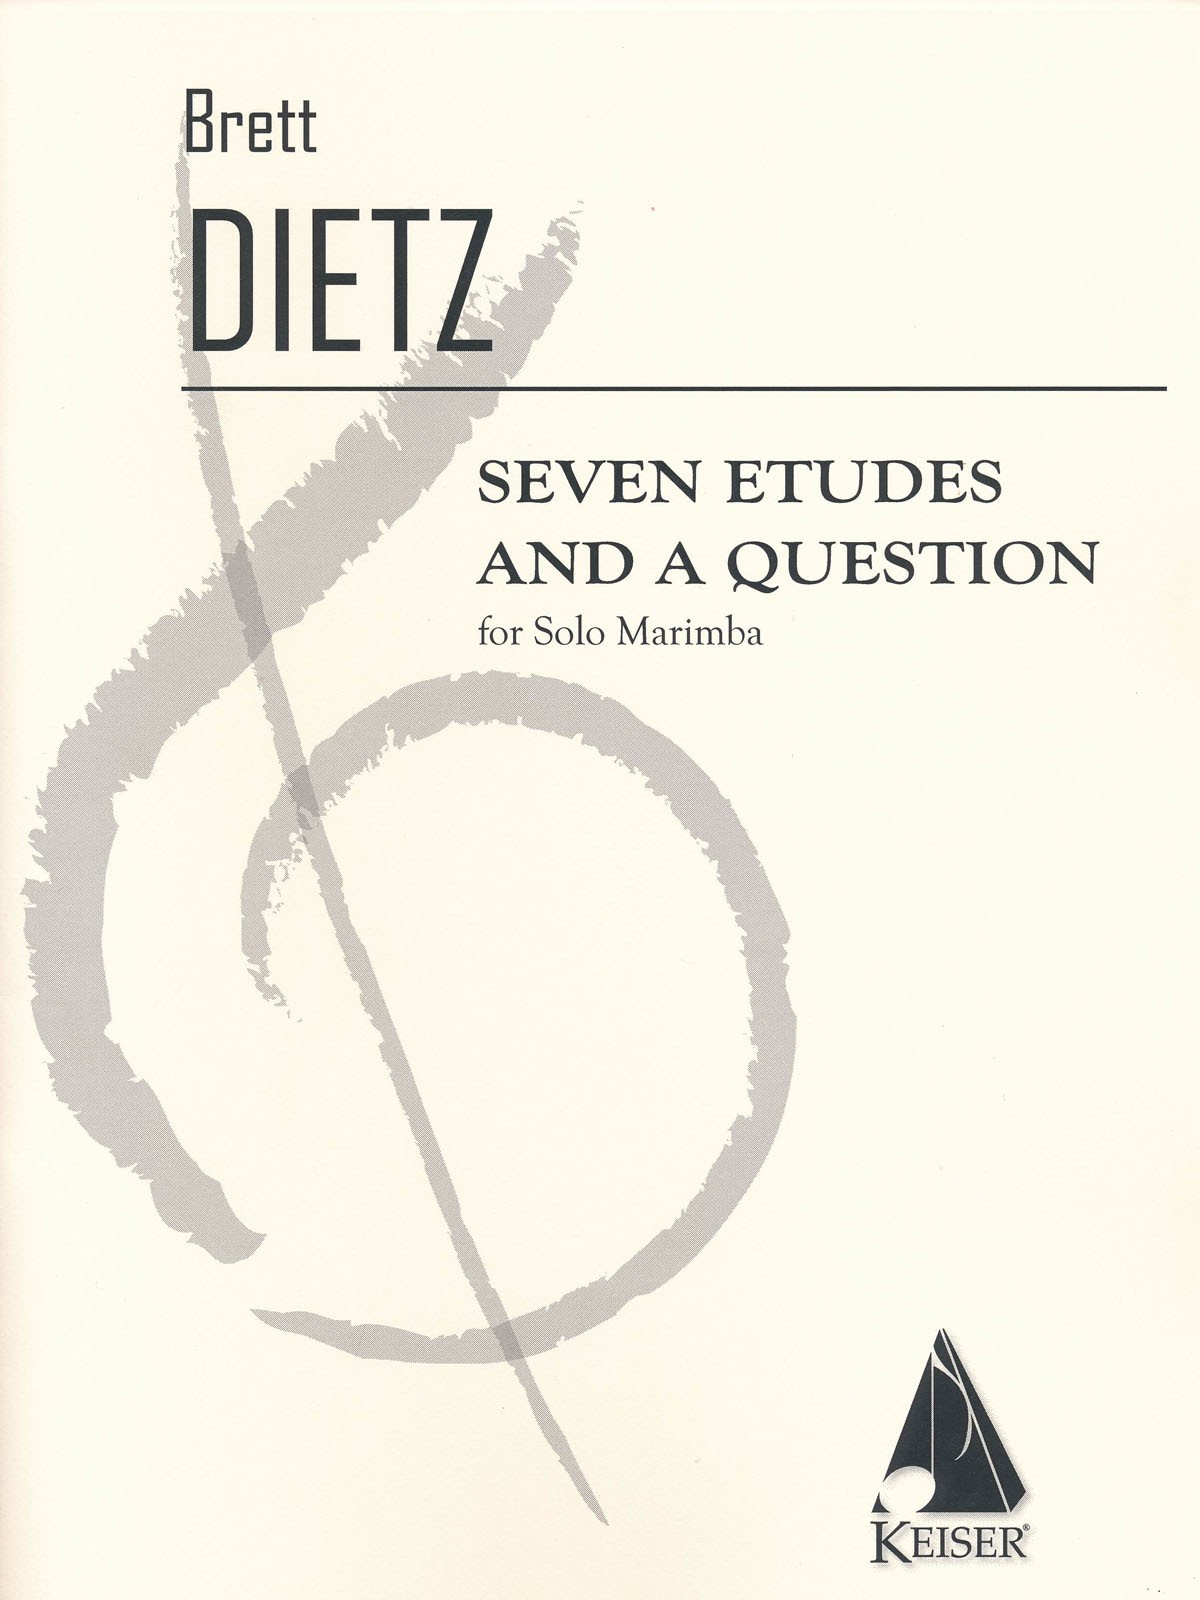 Seven Etudes and A Question by Brett William Dietz